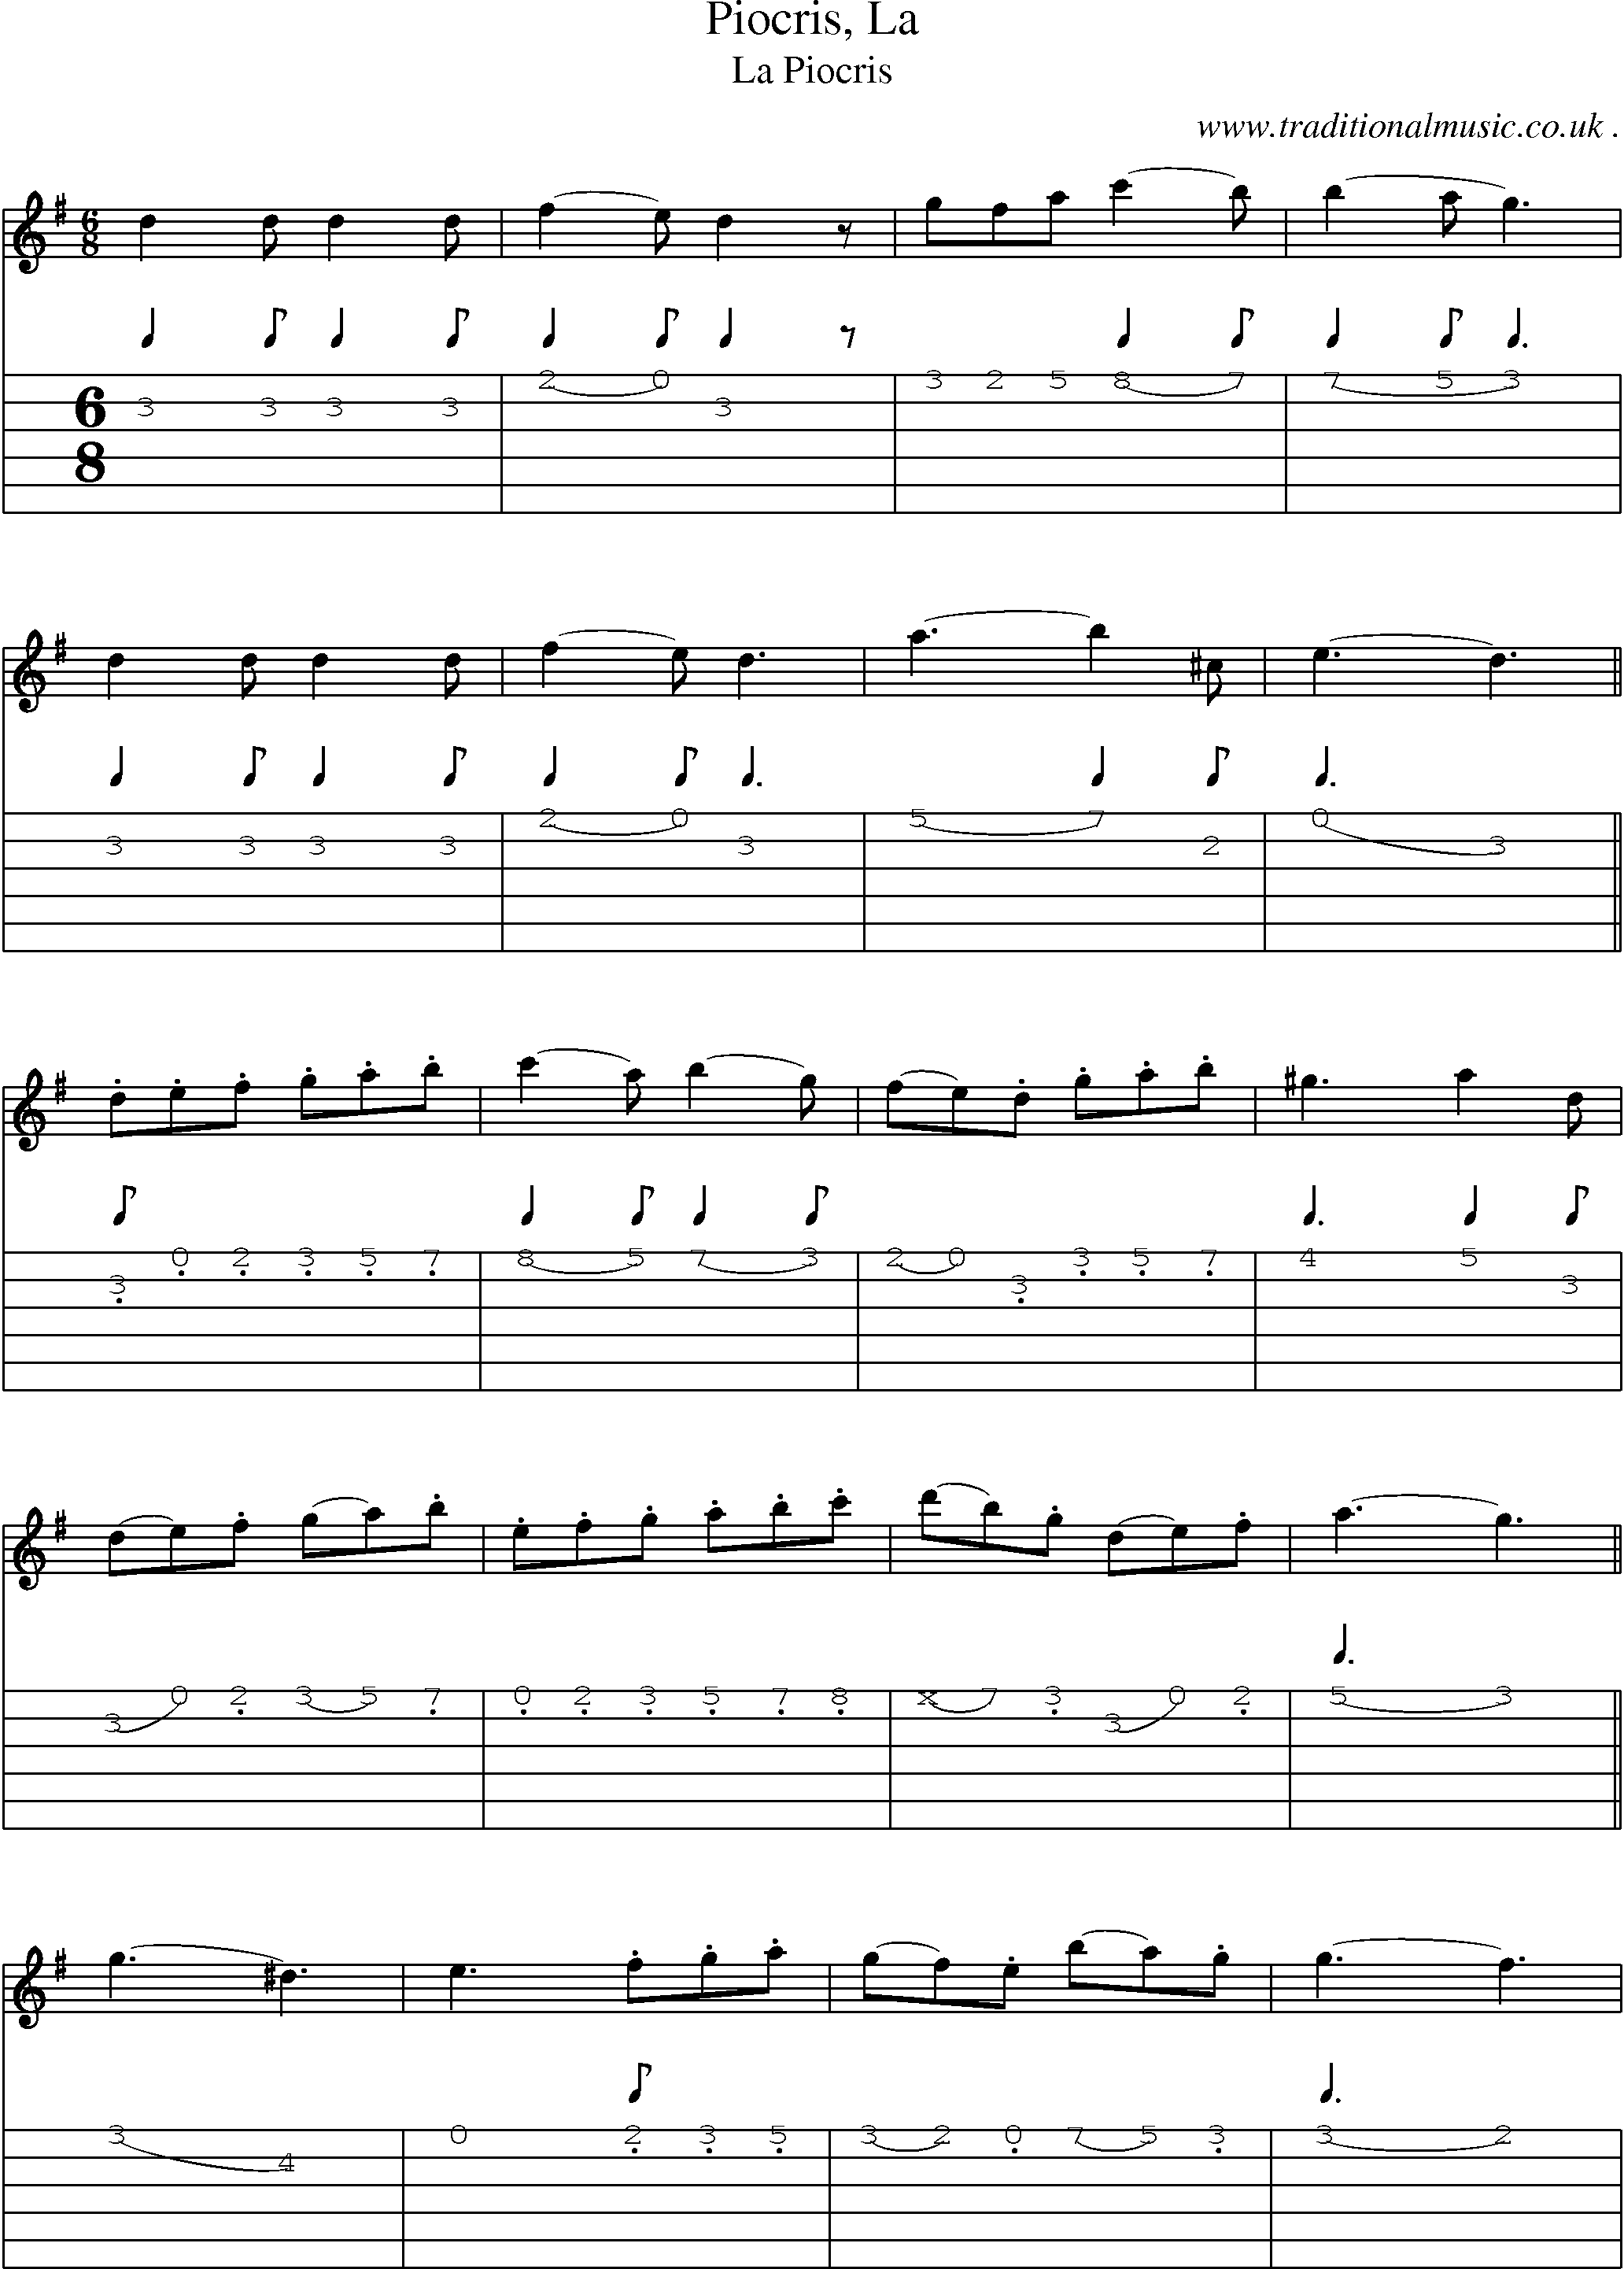 Sheet-Music and Guitar Tabs for Piocris La